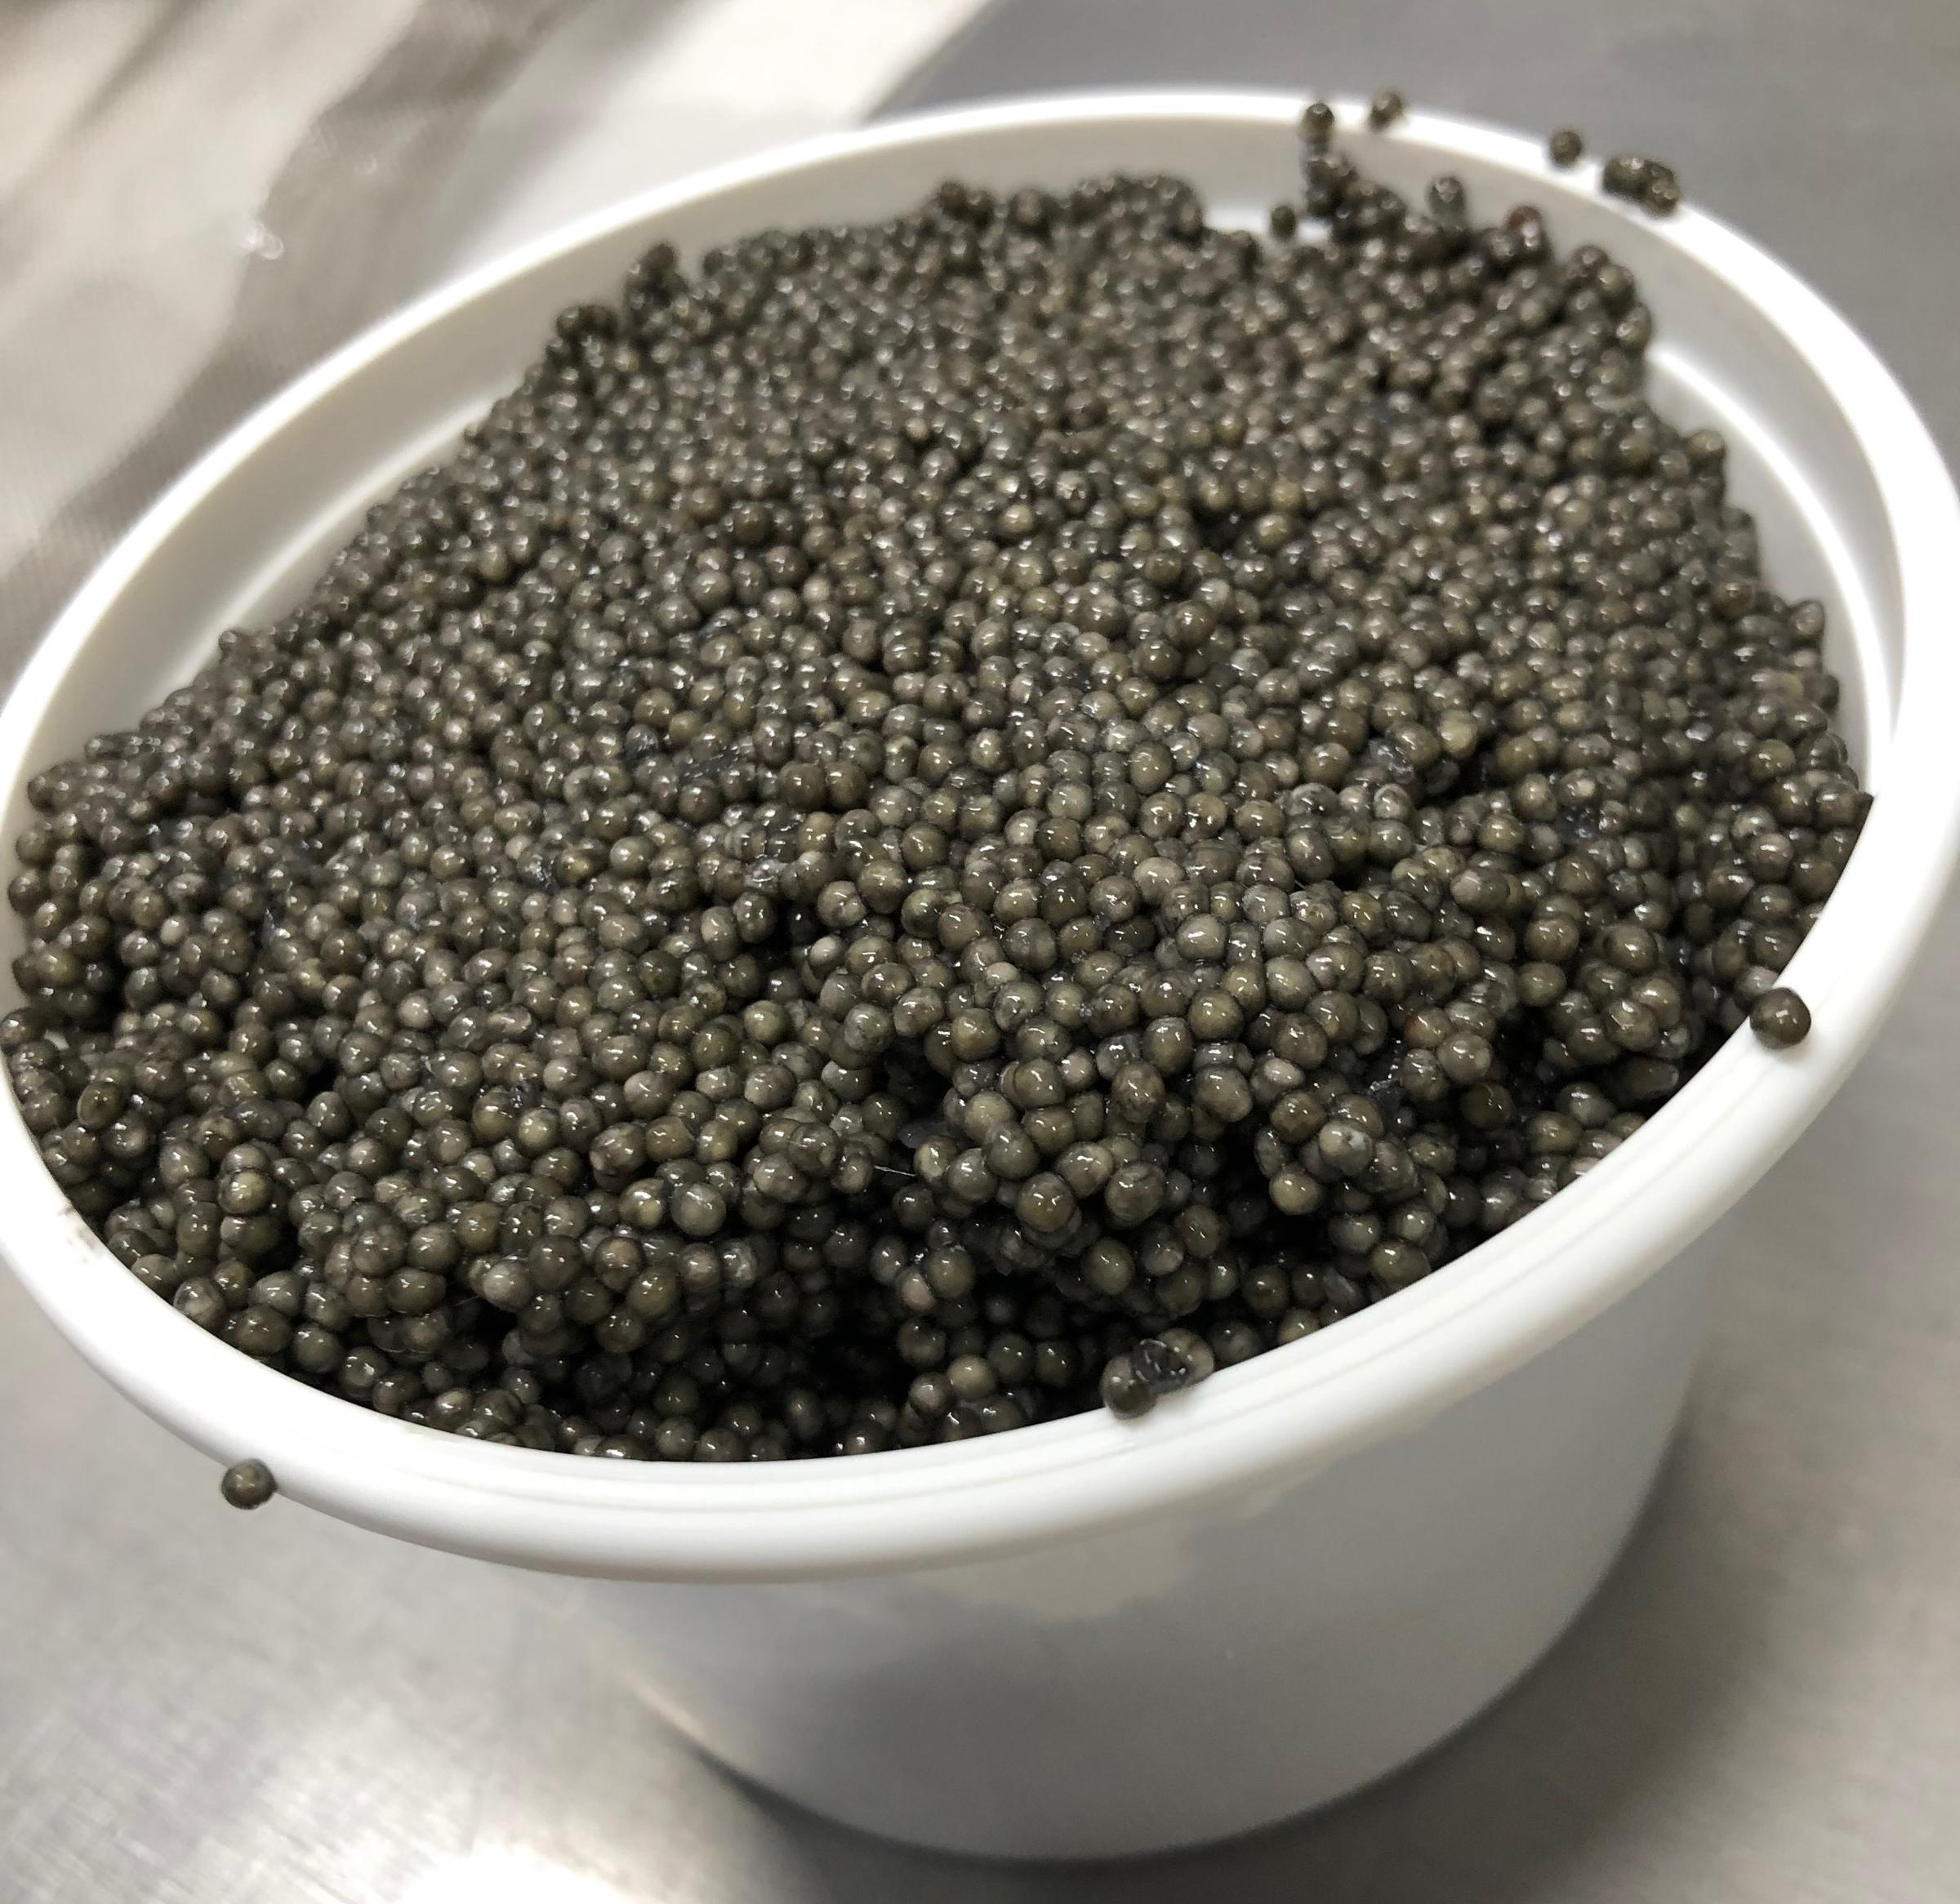 Kentucky Caviar: How One West Kentucky Fish Market Is Betting On Fish Eggs  | WKMS